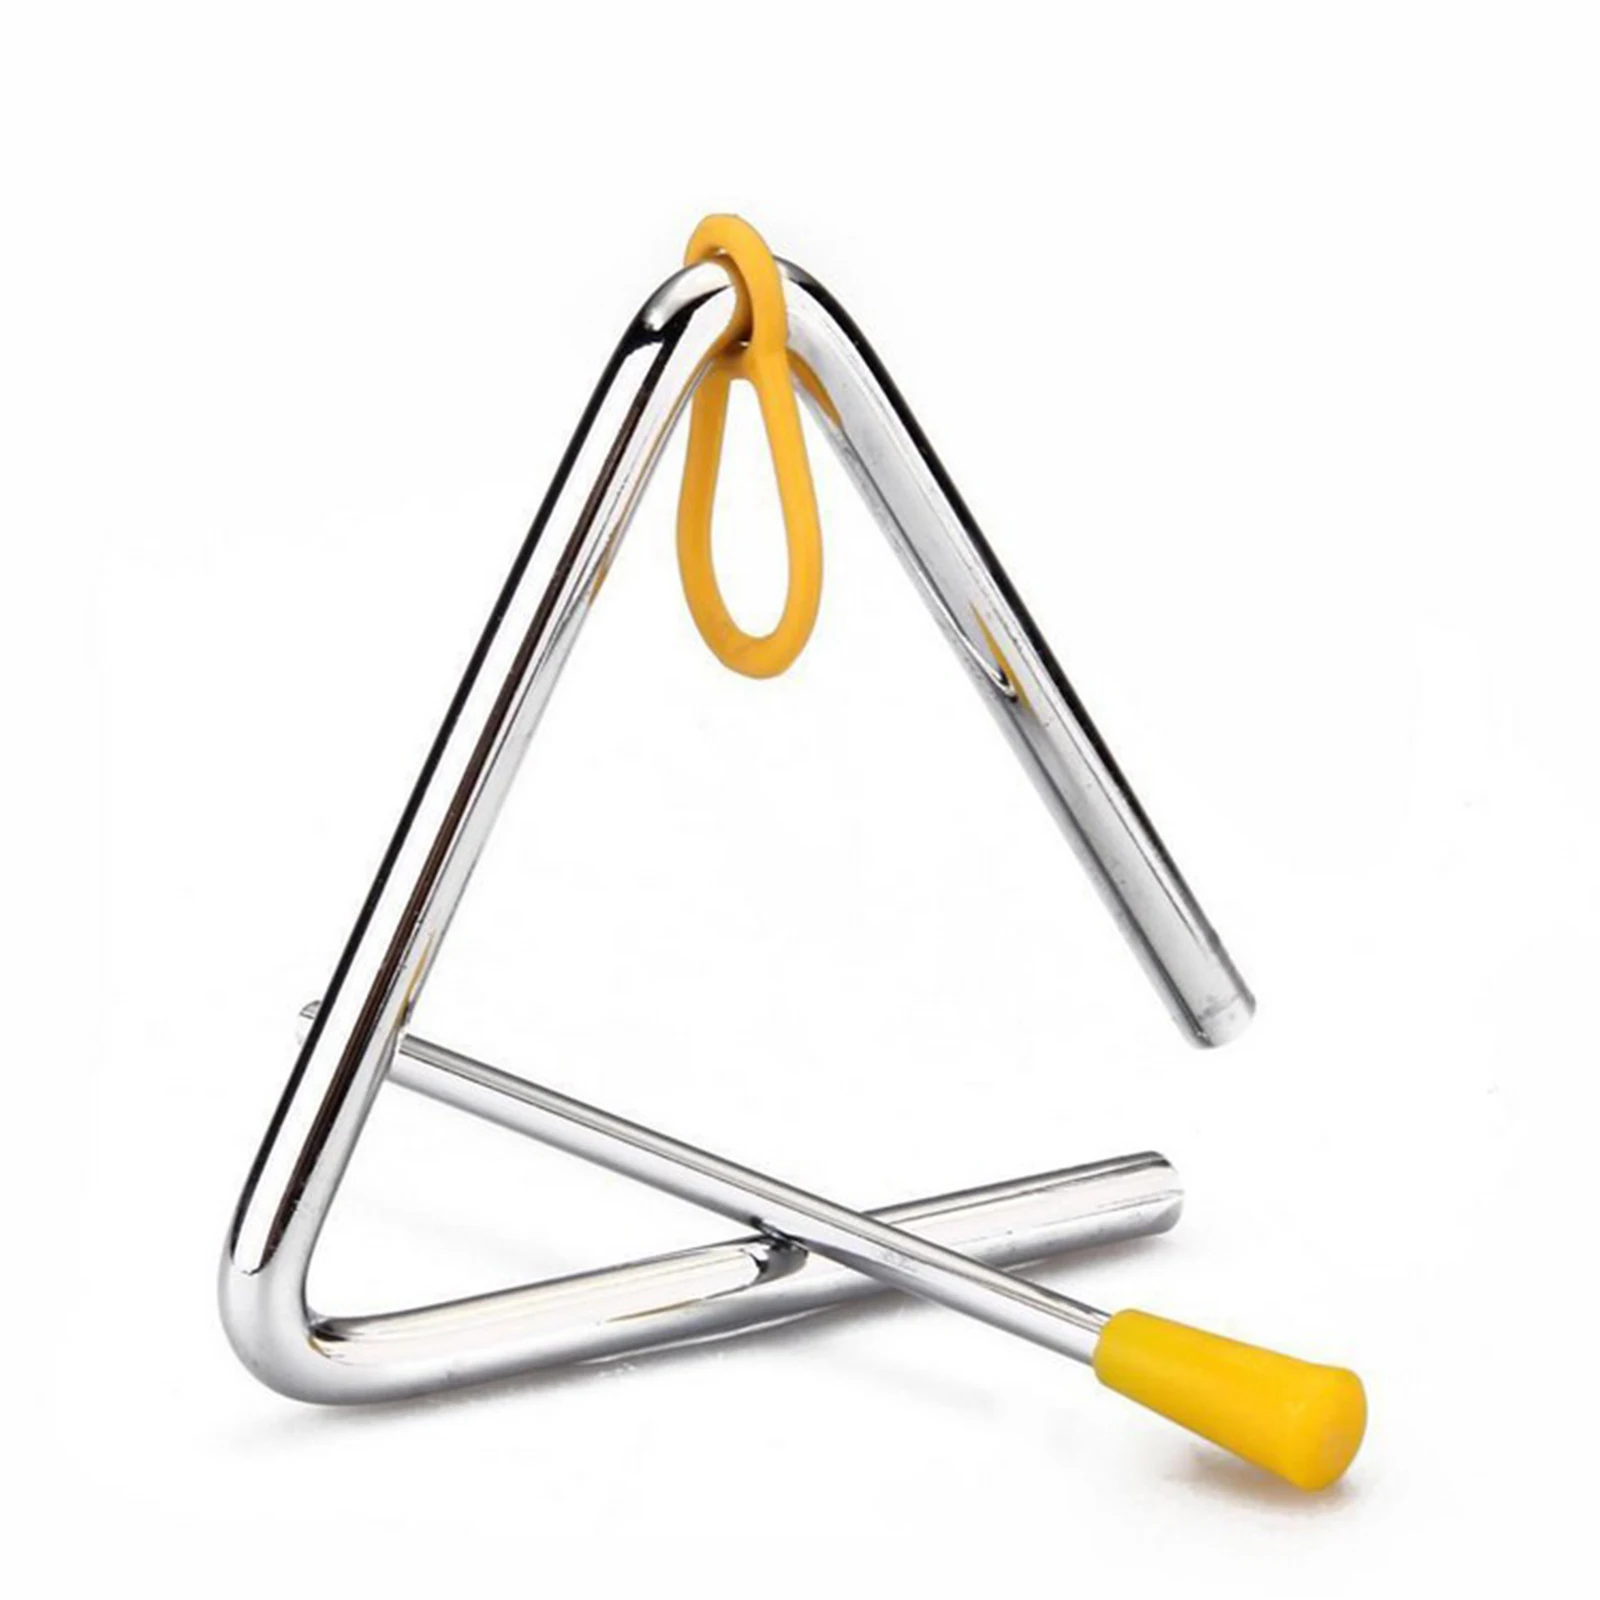 

Newest 1 Pcs Cute Children Toy Musical Instrument Rhythm Band Triangle Educational Percussion Tool Child Birthday Gift